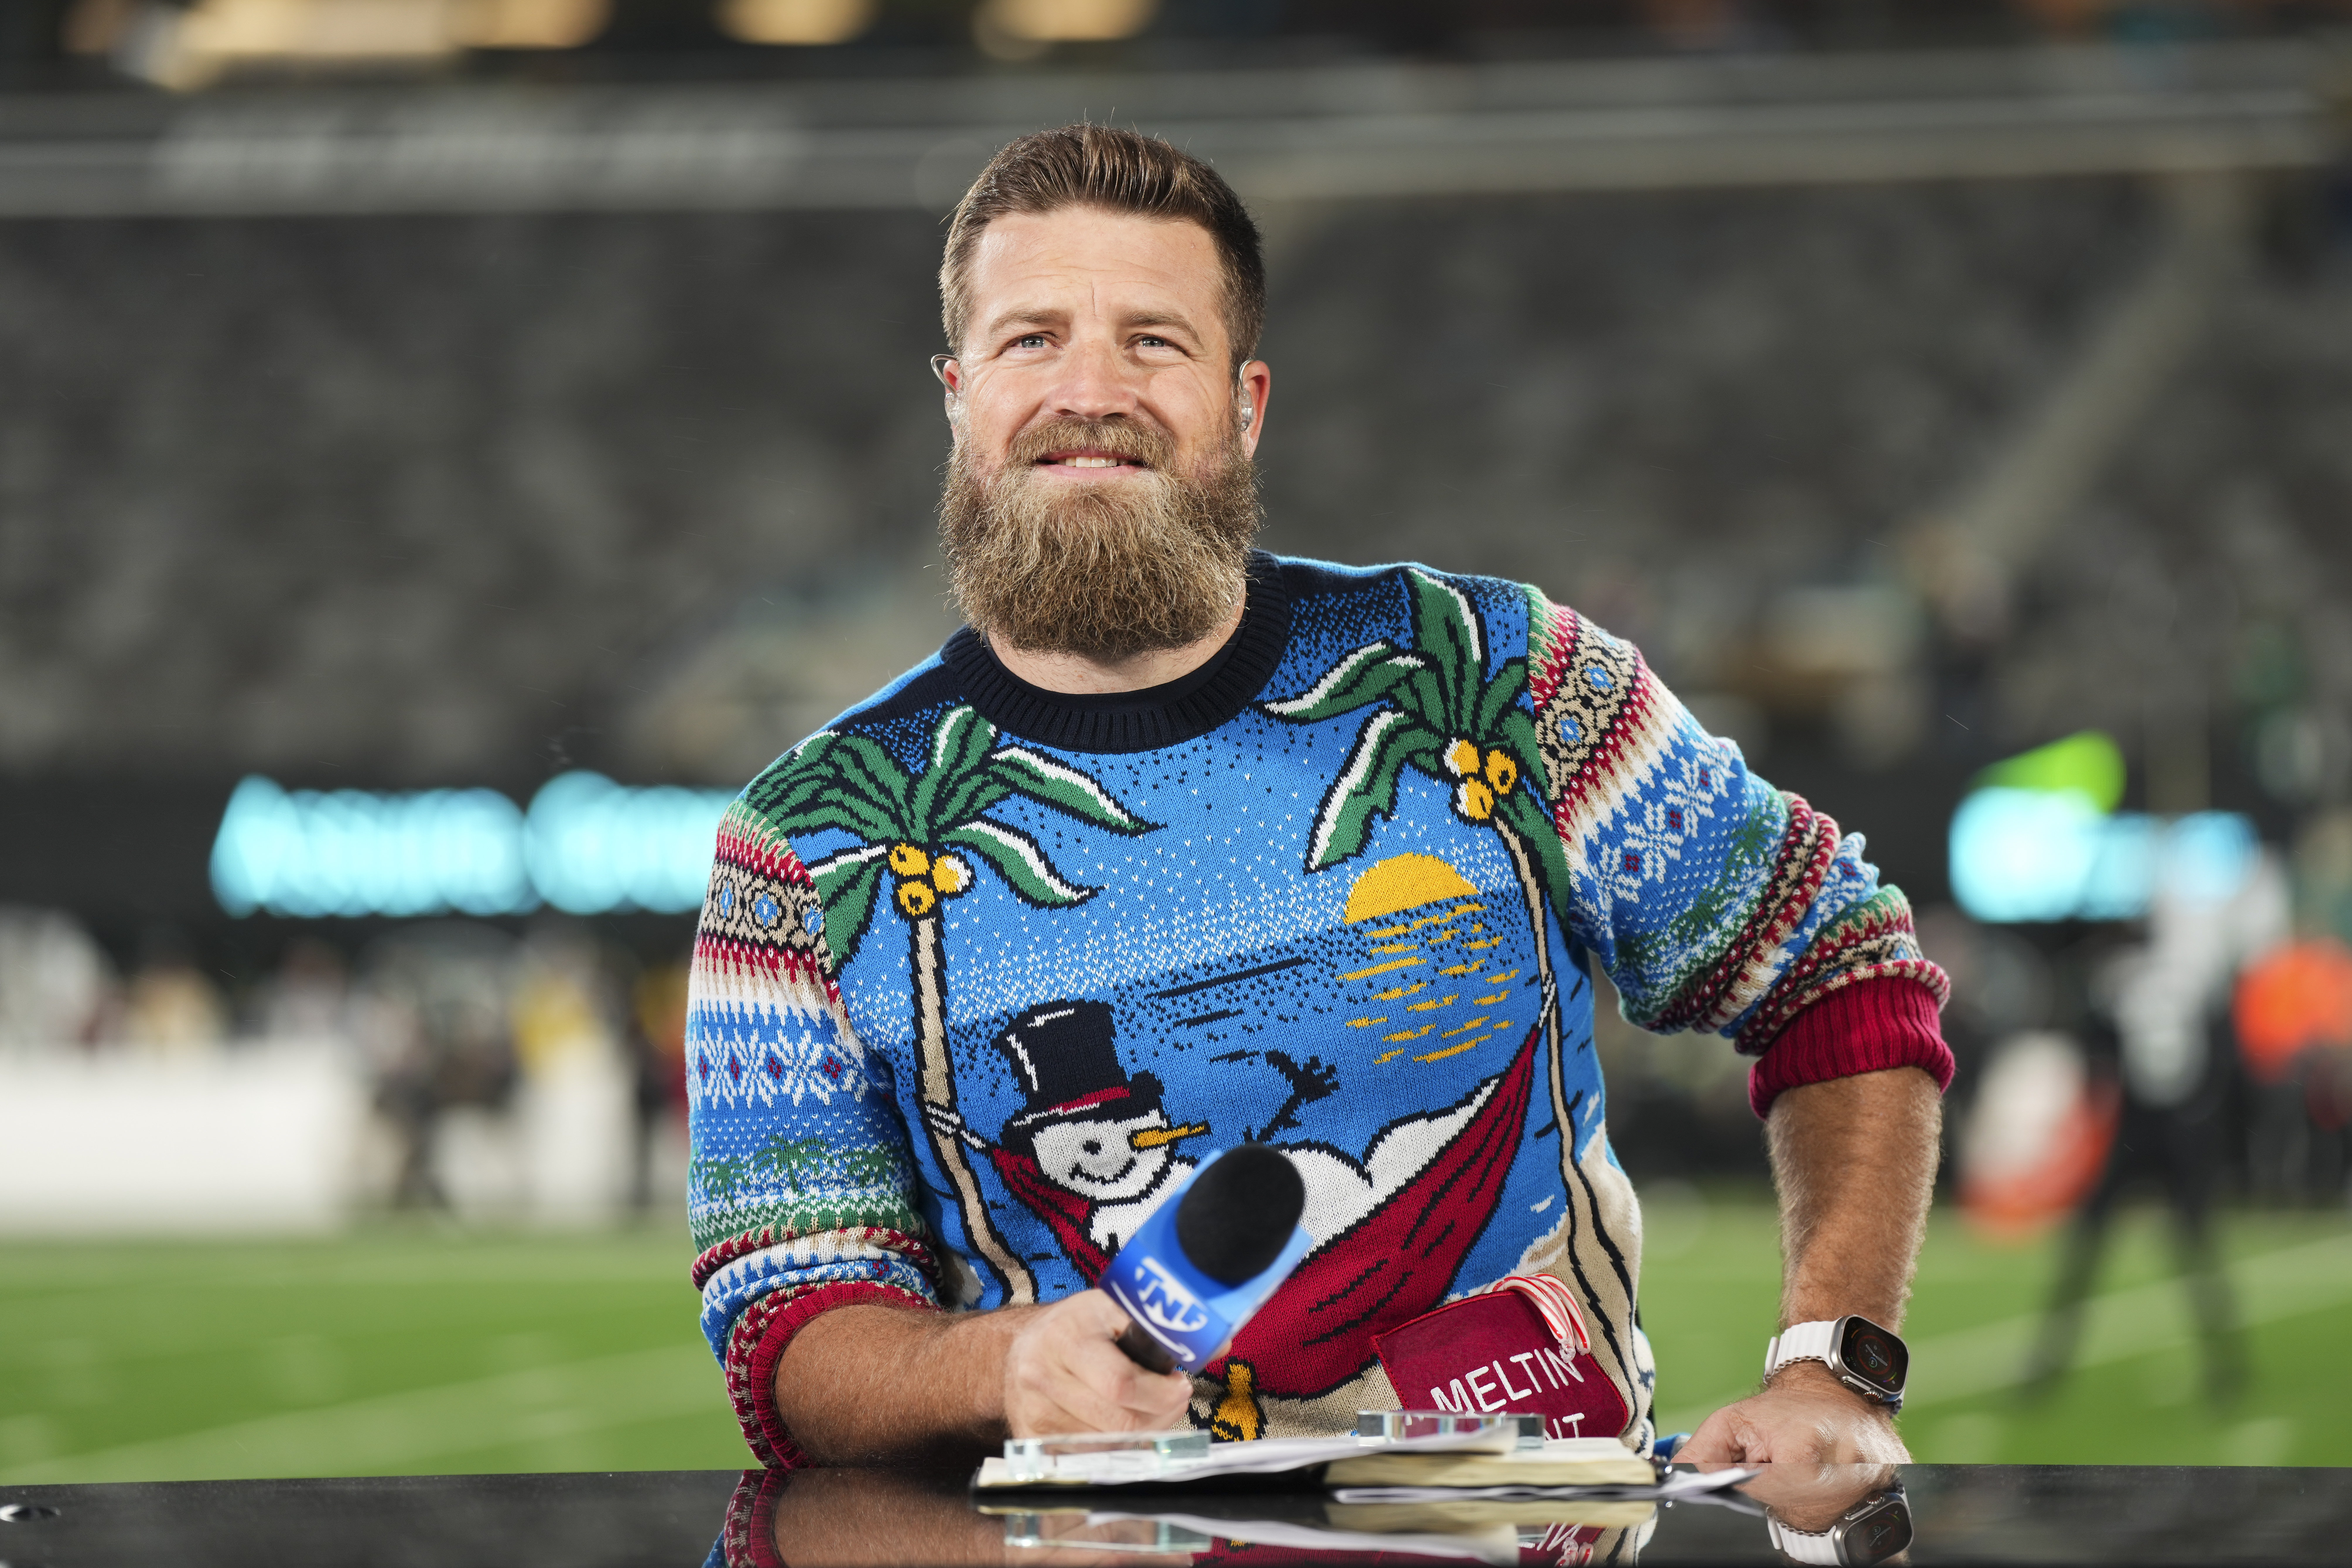 Ryan Fitzpatrick speaks prior to a football game at MetLife Stadium on December 22, 2022, in East Rutherford, New Jersey | Source: Getty Images